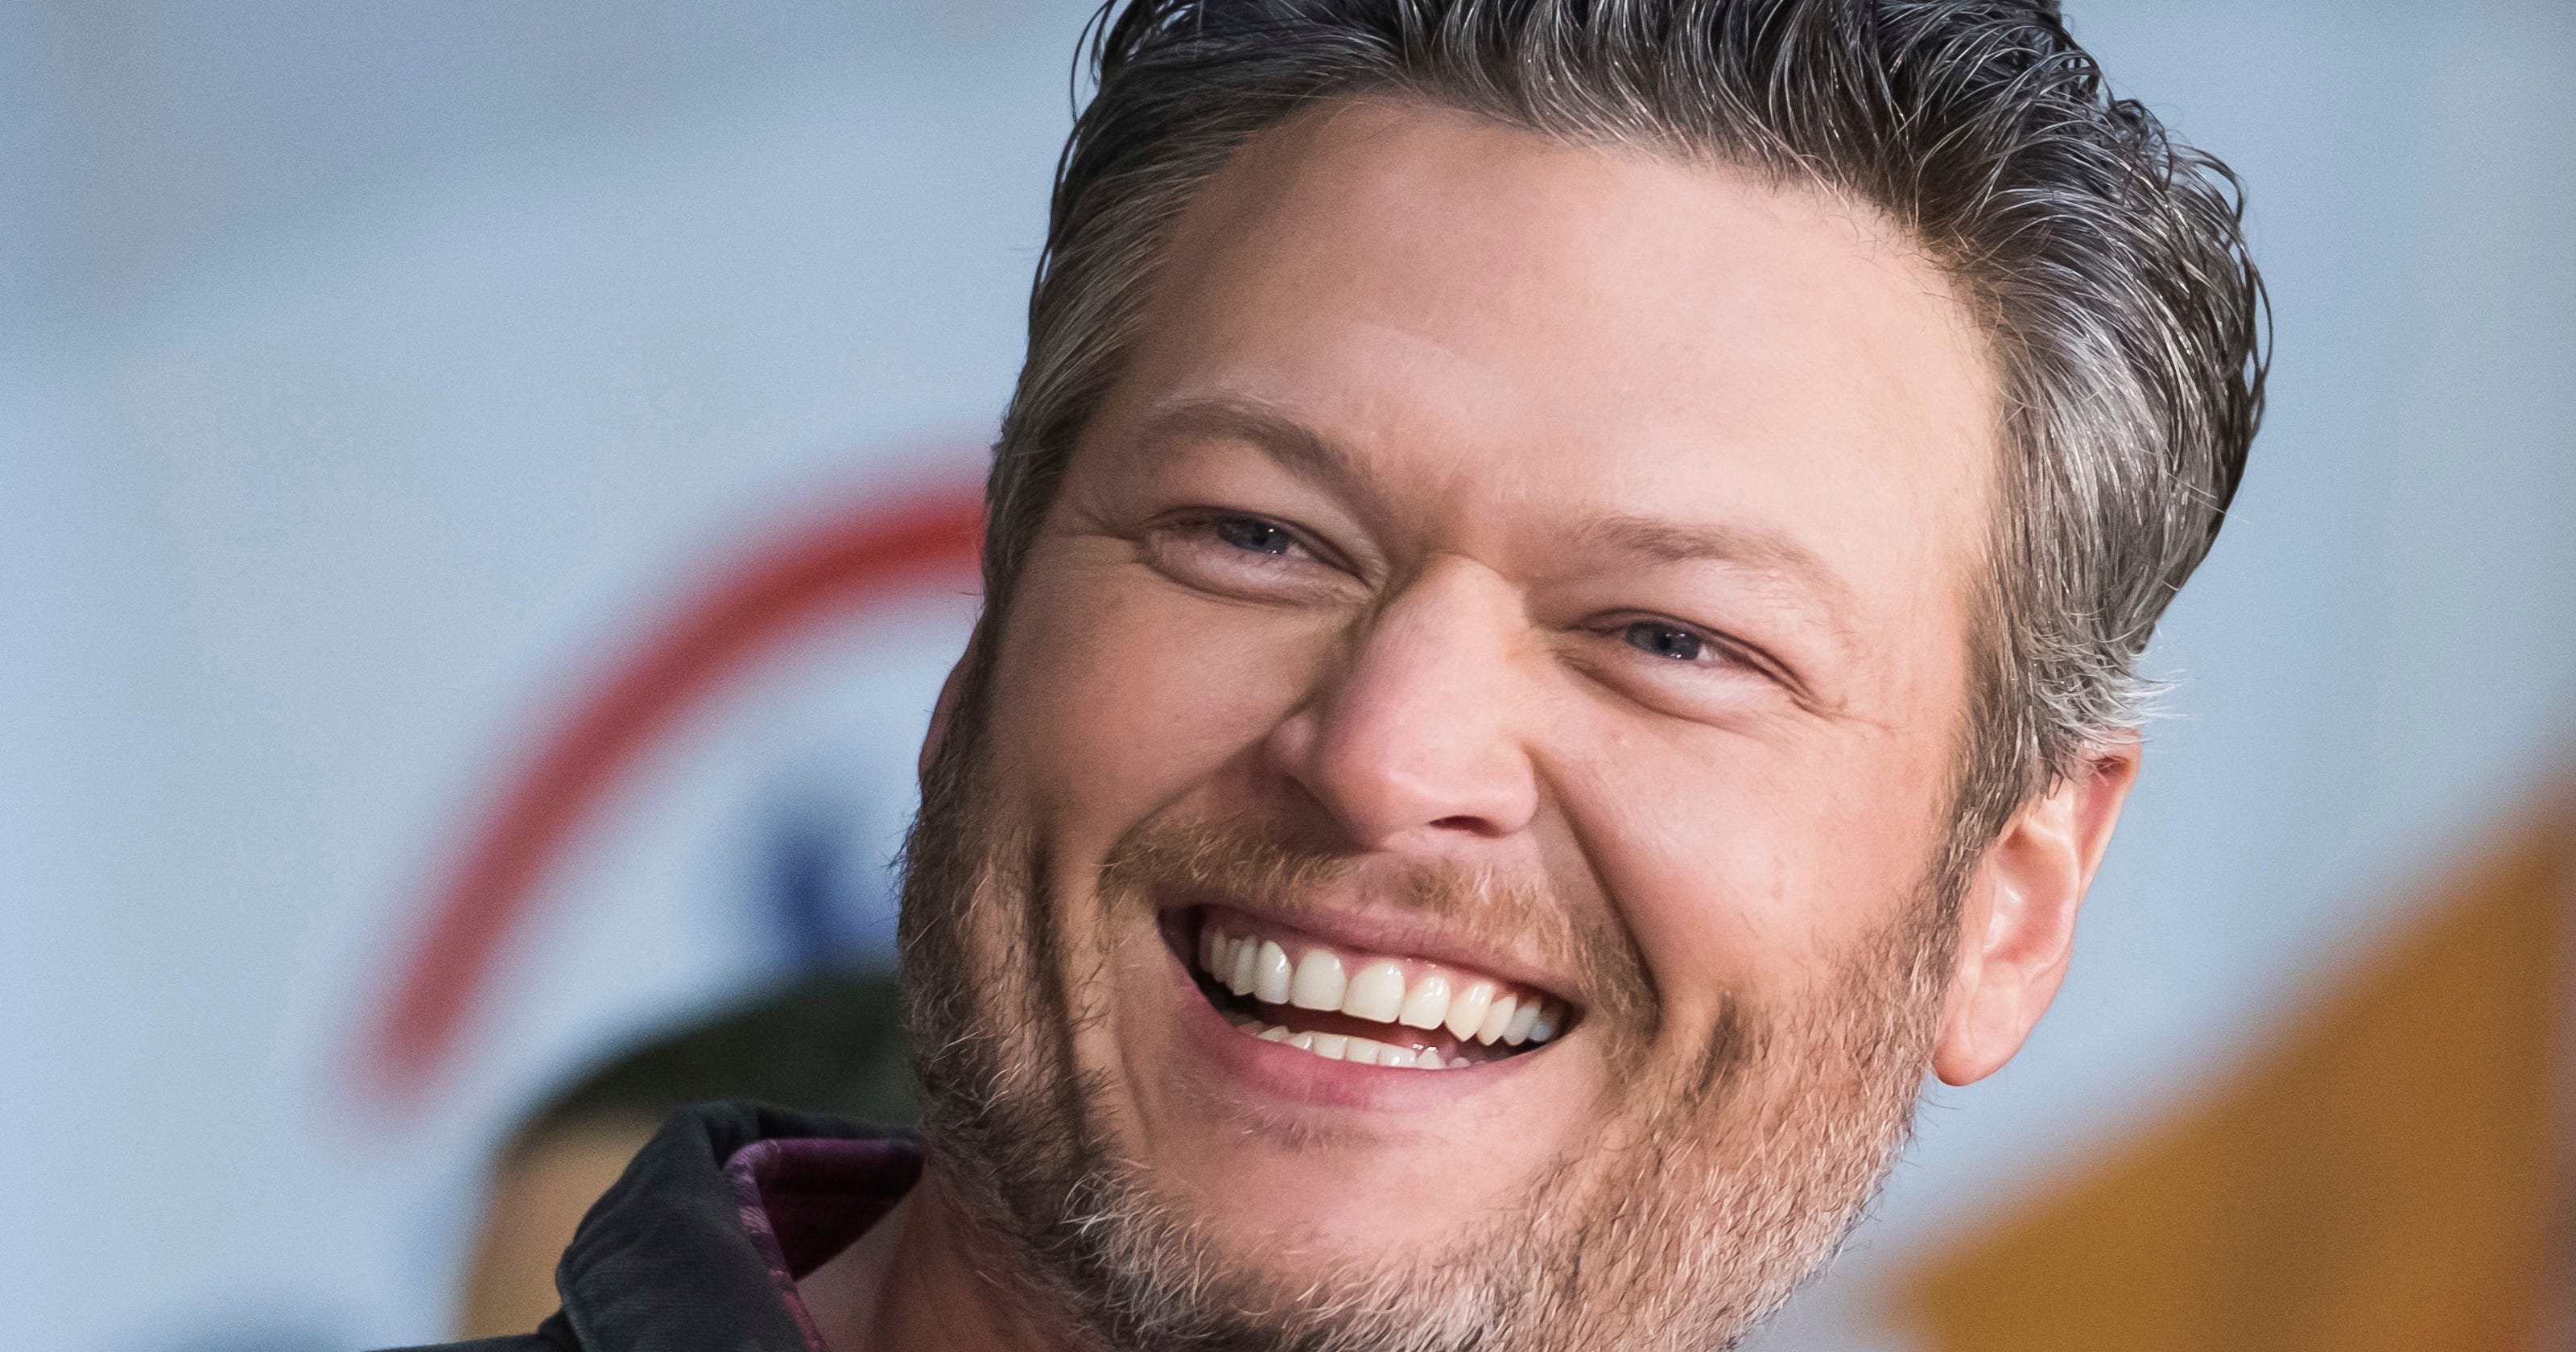 Blake Shelton Twitter Is Unsure About Peoples Sexiest Man Alive